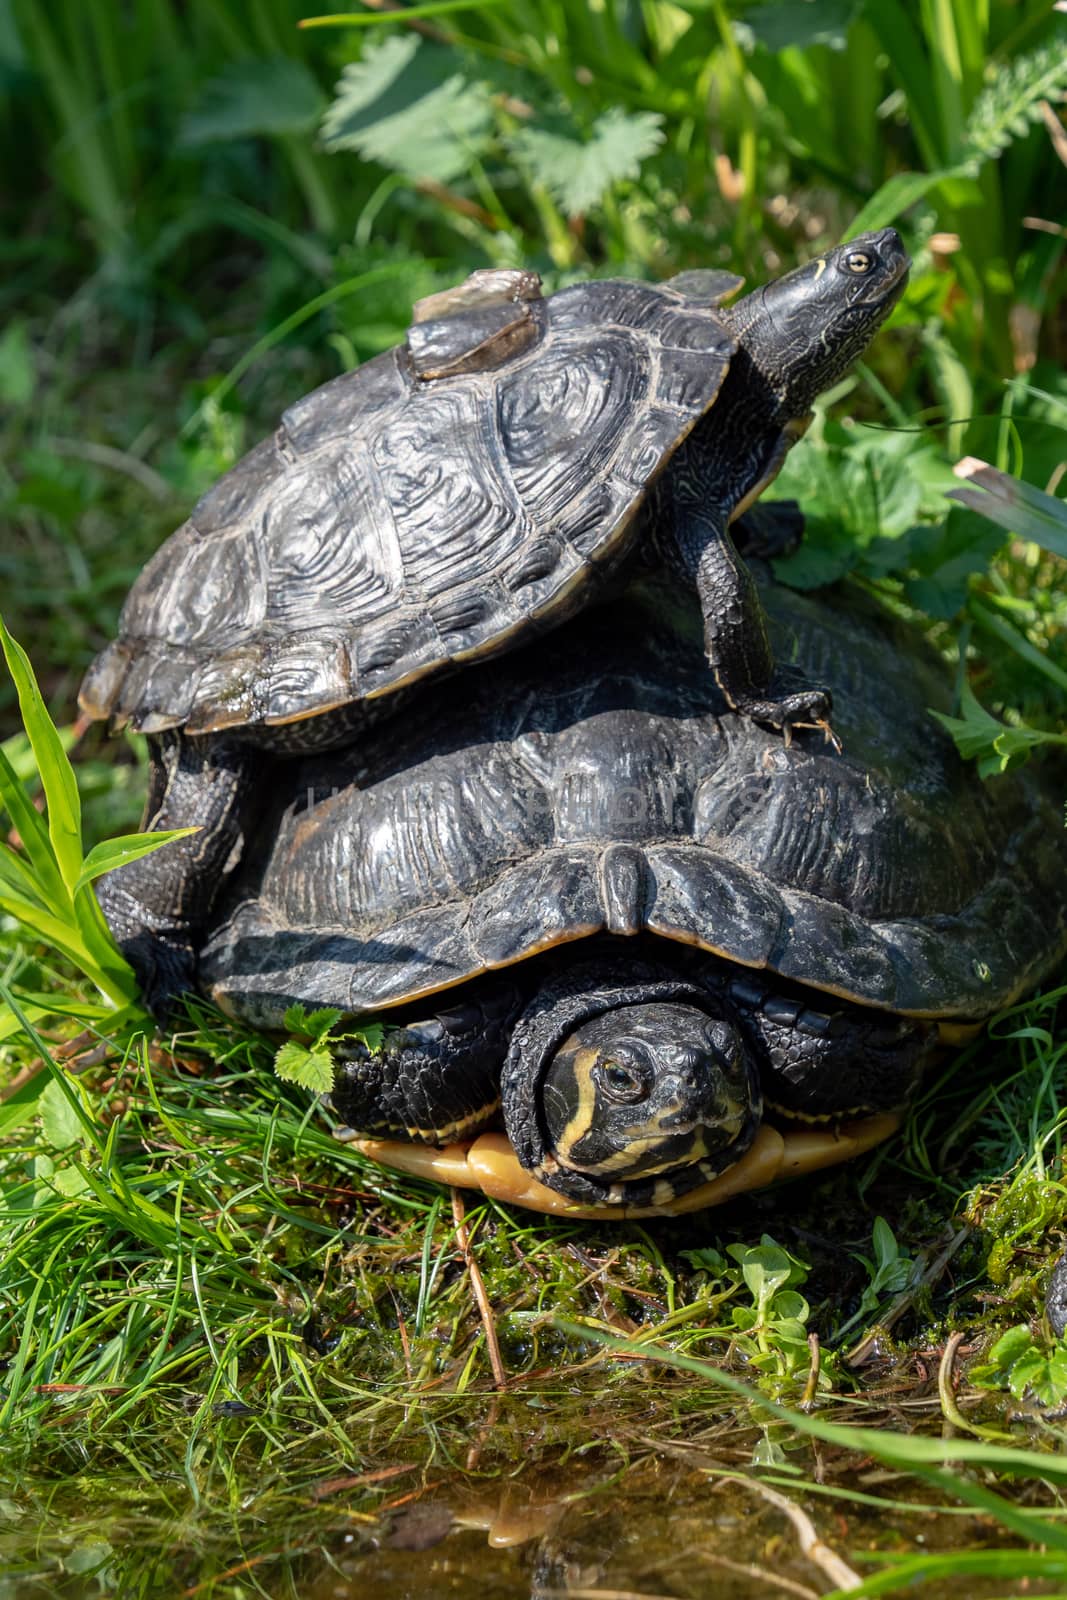 Turtles lying on the grass. Group of red-eared slider (Trachemys by xtrekx